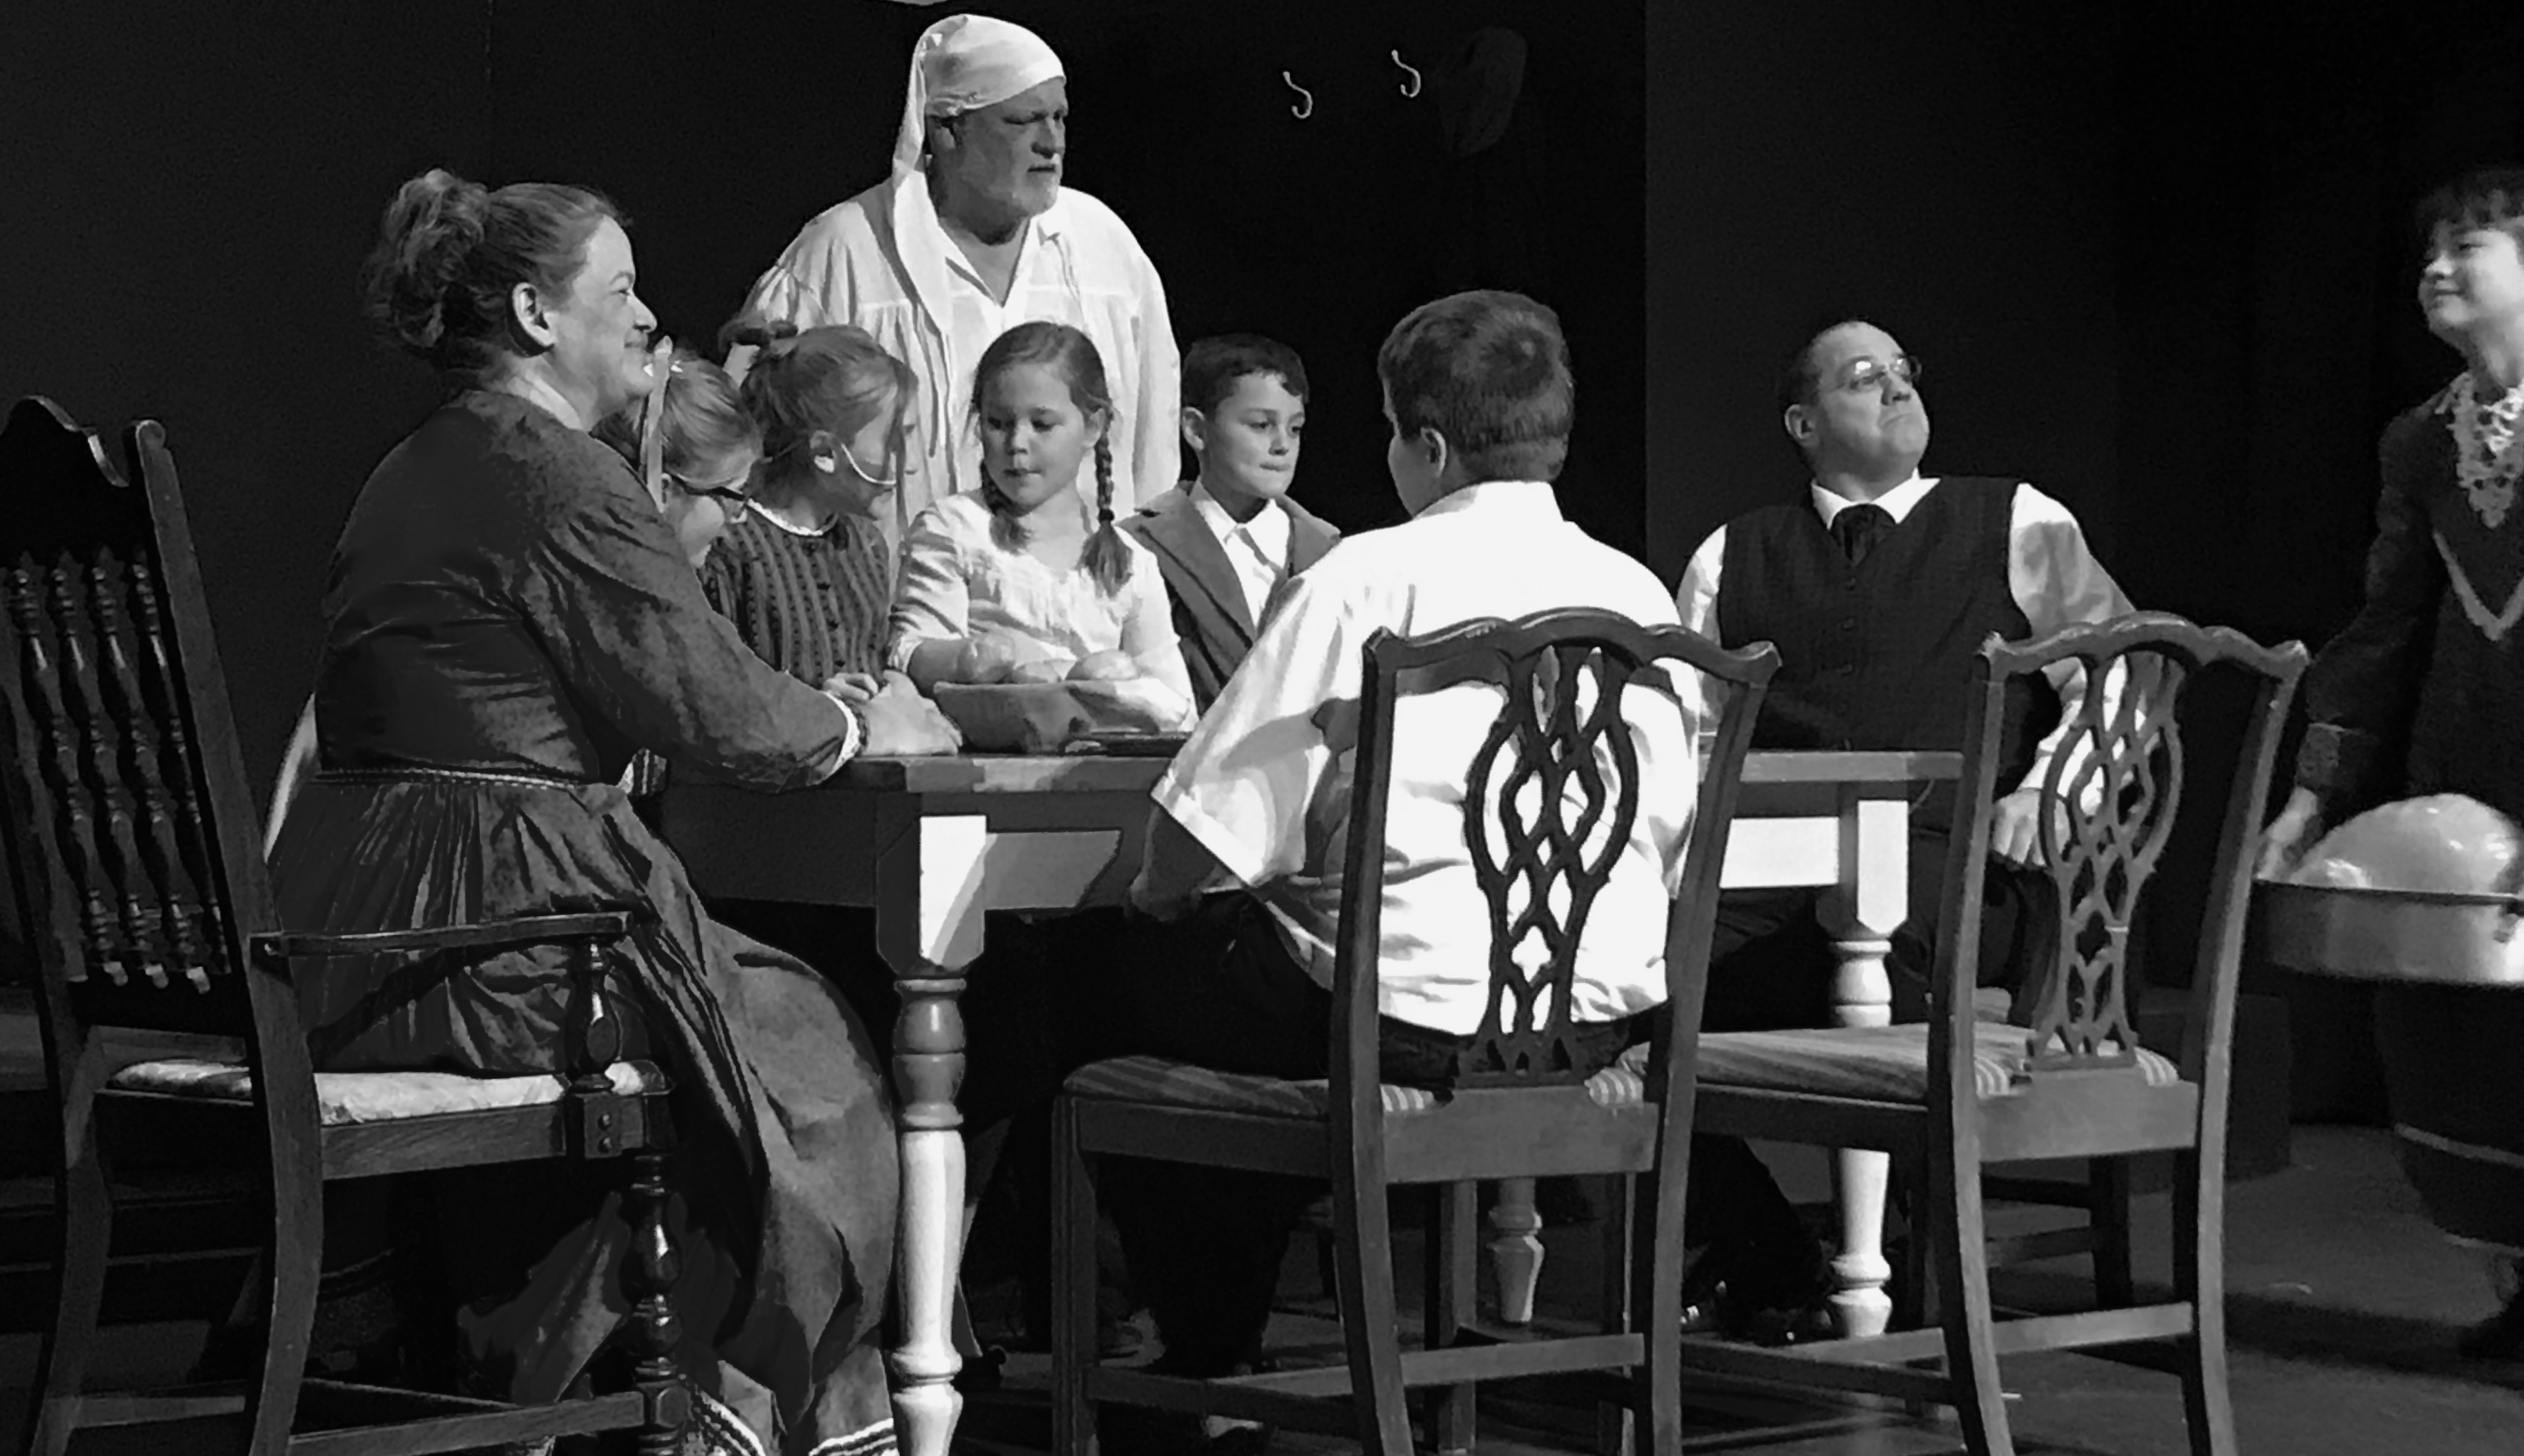 A Christmas Carol - Cratchit family dinner